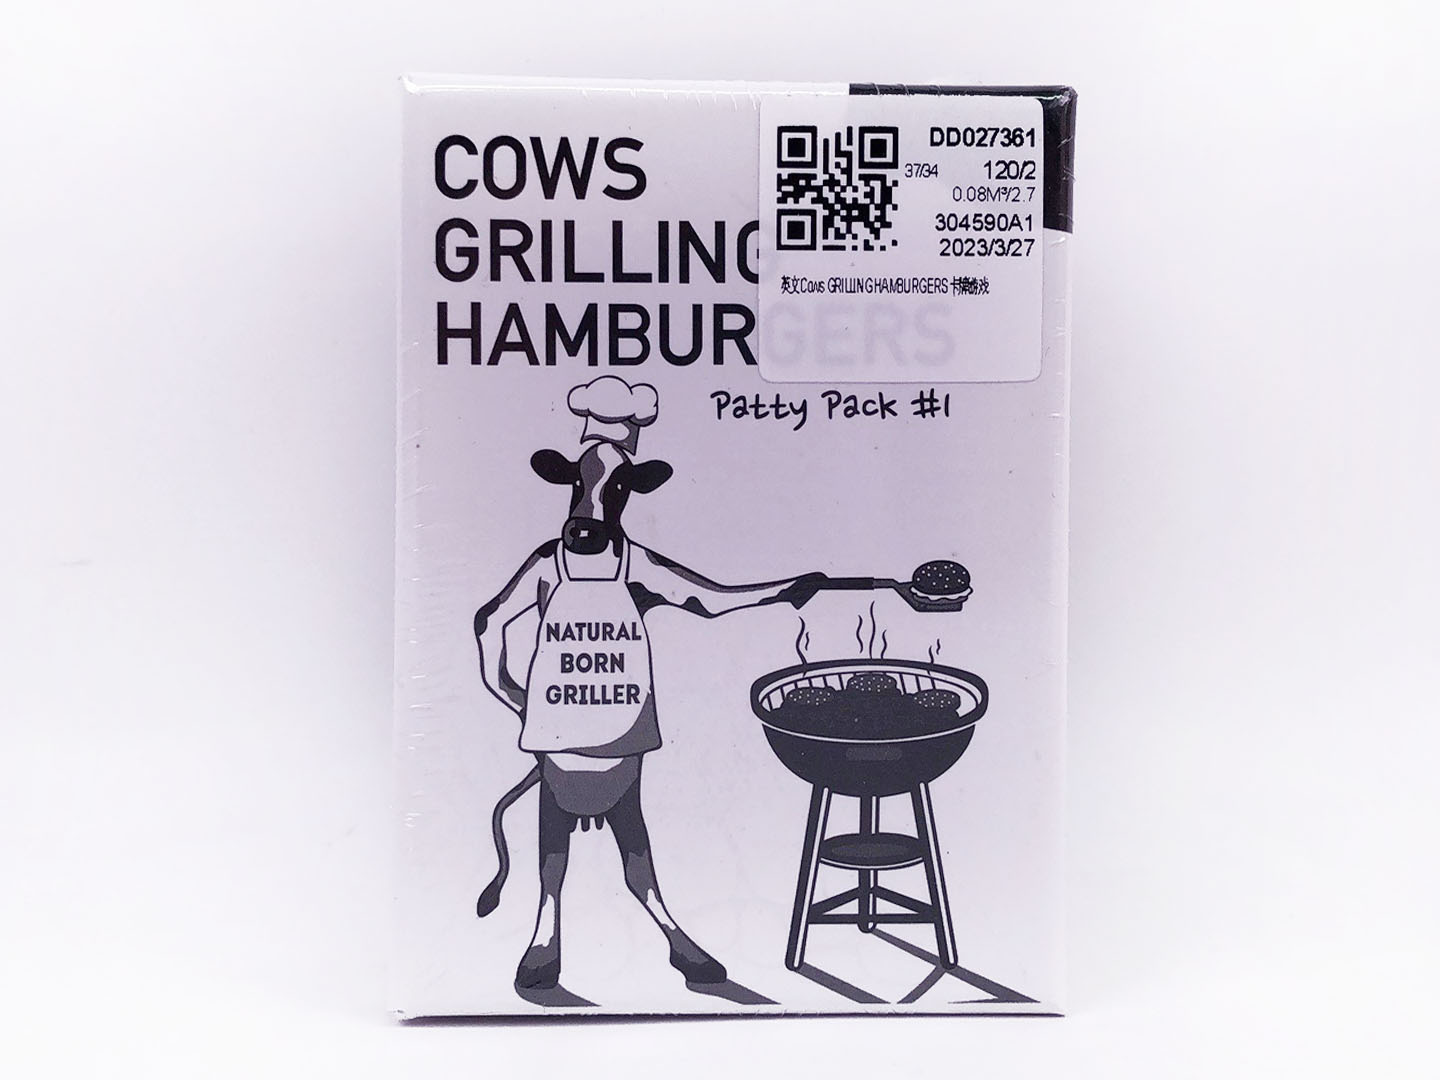 Cows Grilling Hamburgers toys